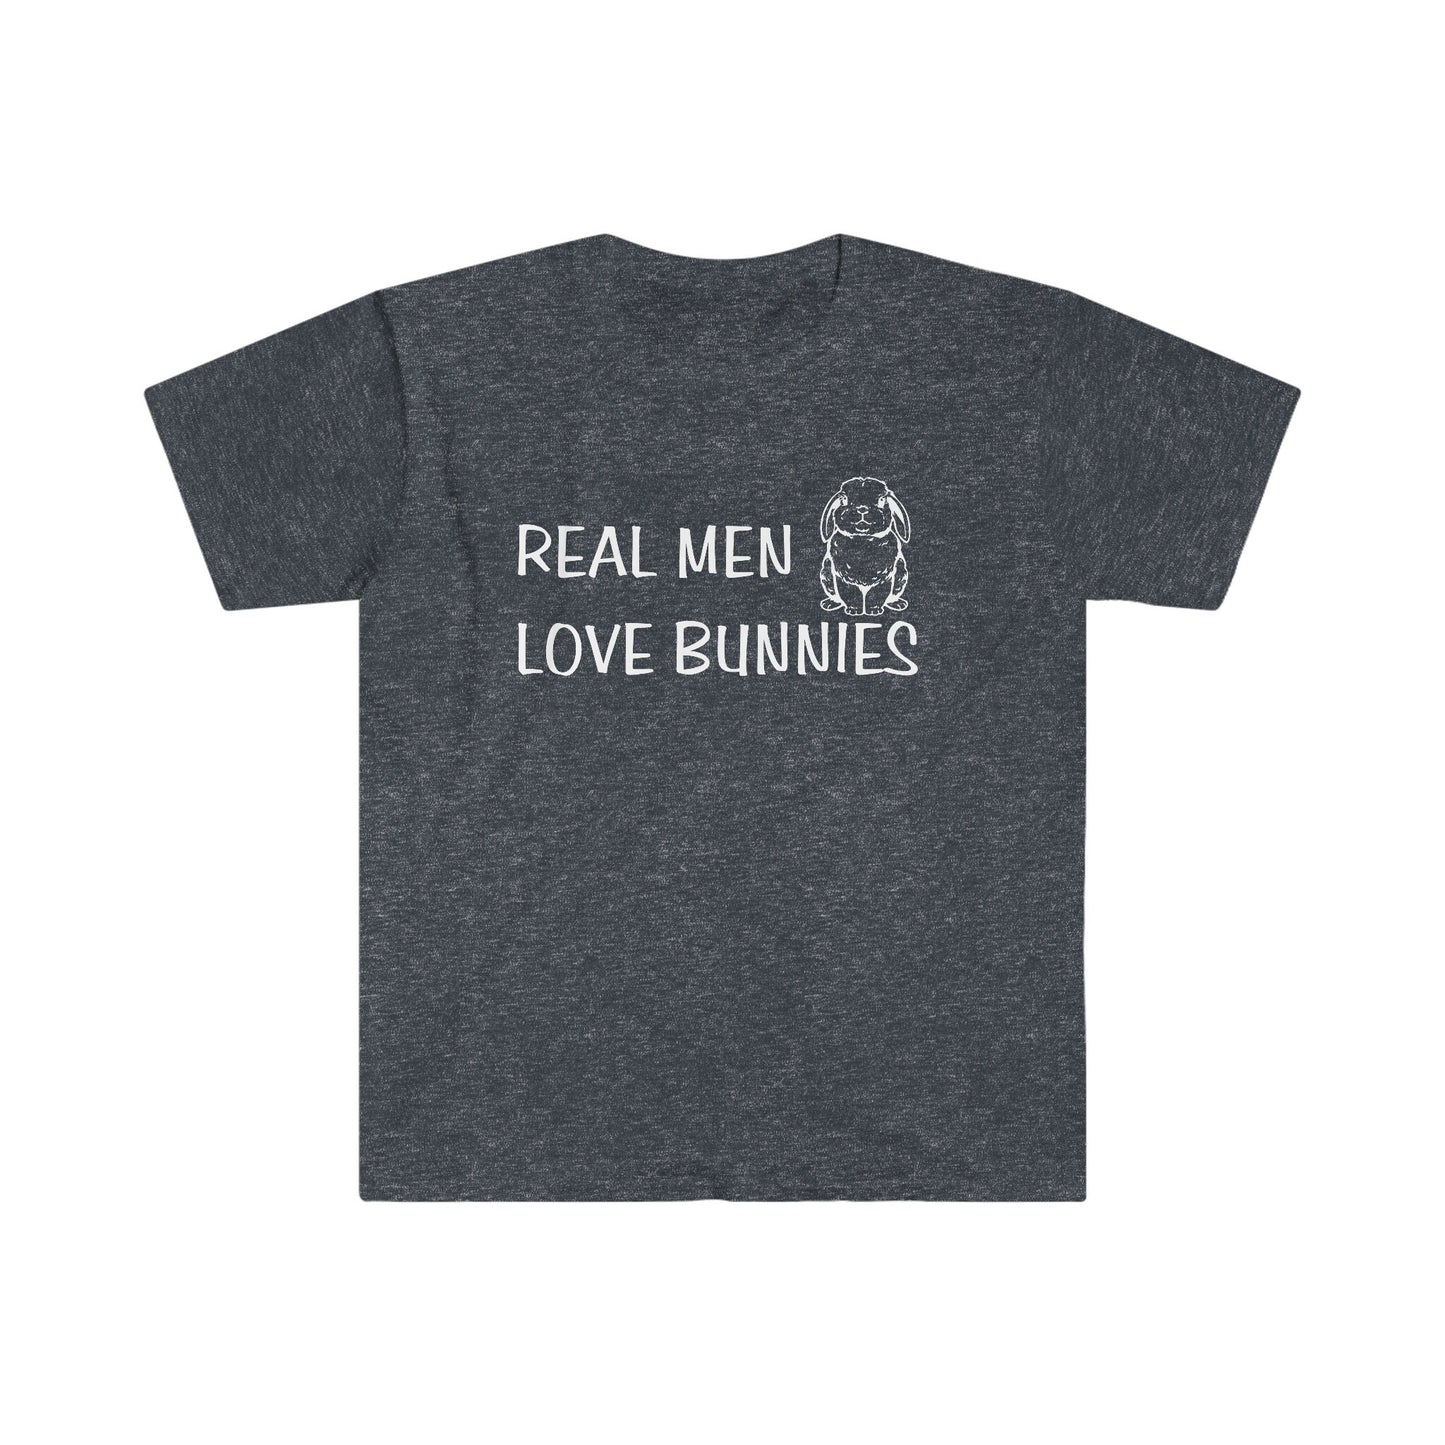 Real Men LOVE BUNNIES - Unisex Softstyle T-Shirt